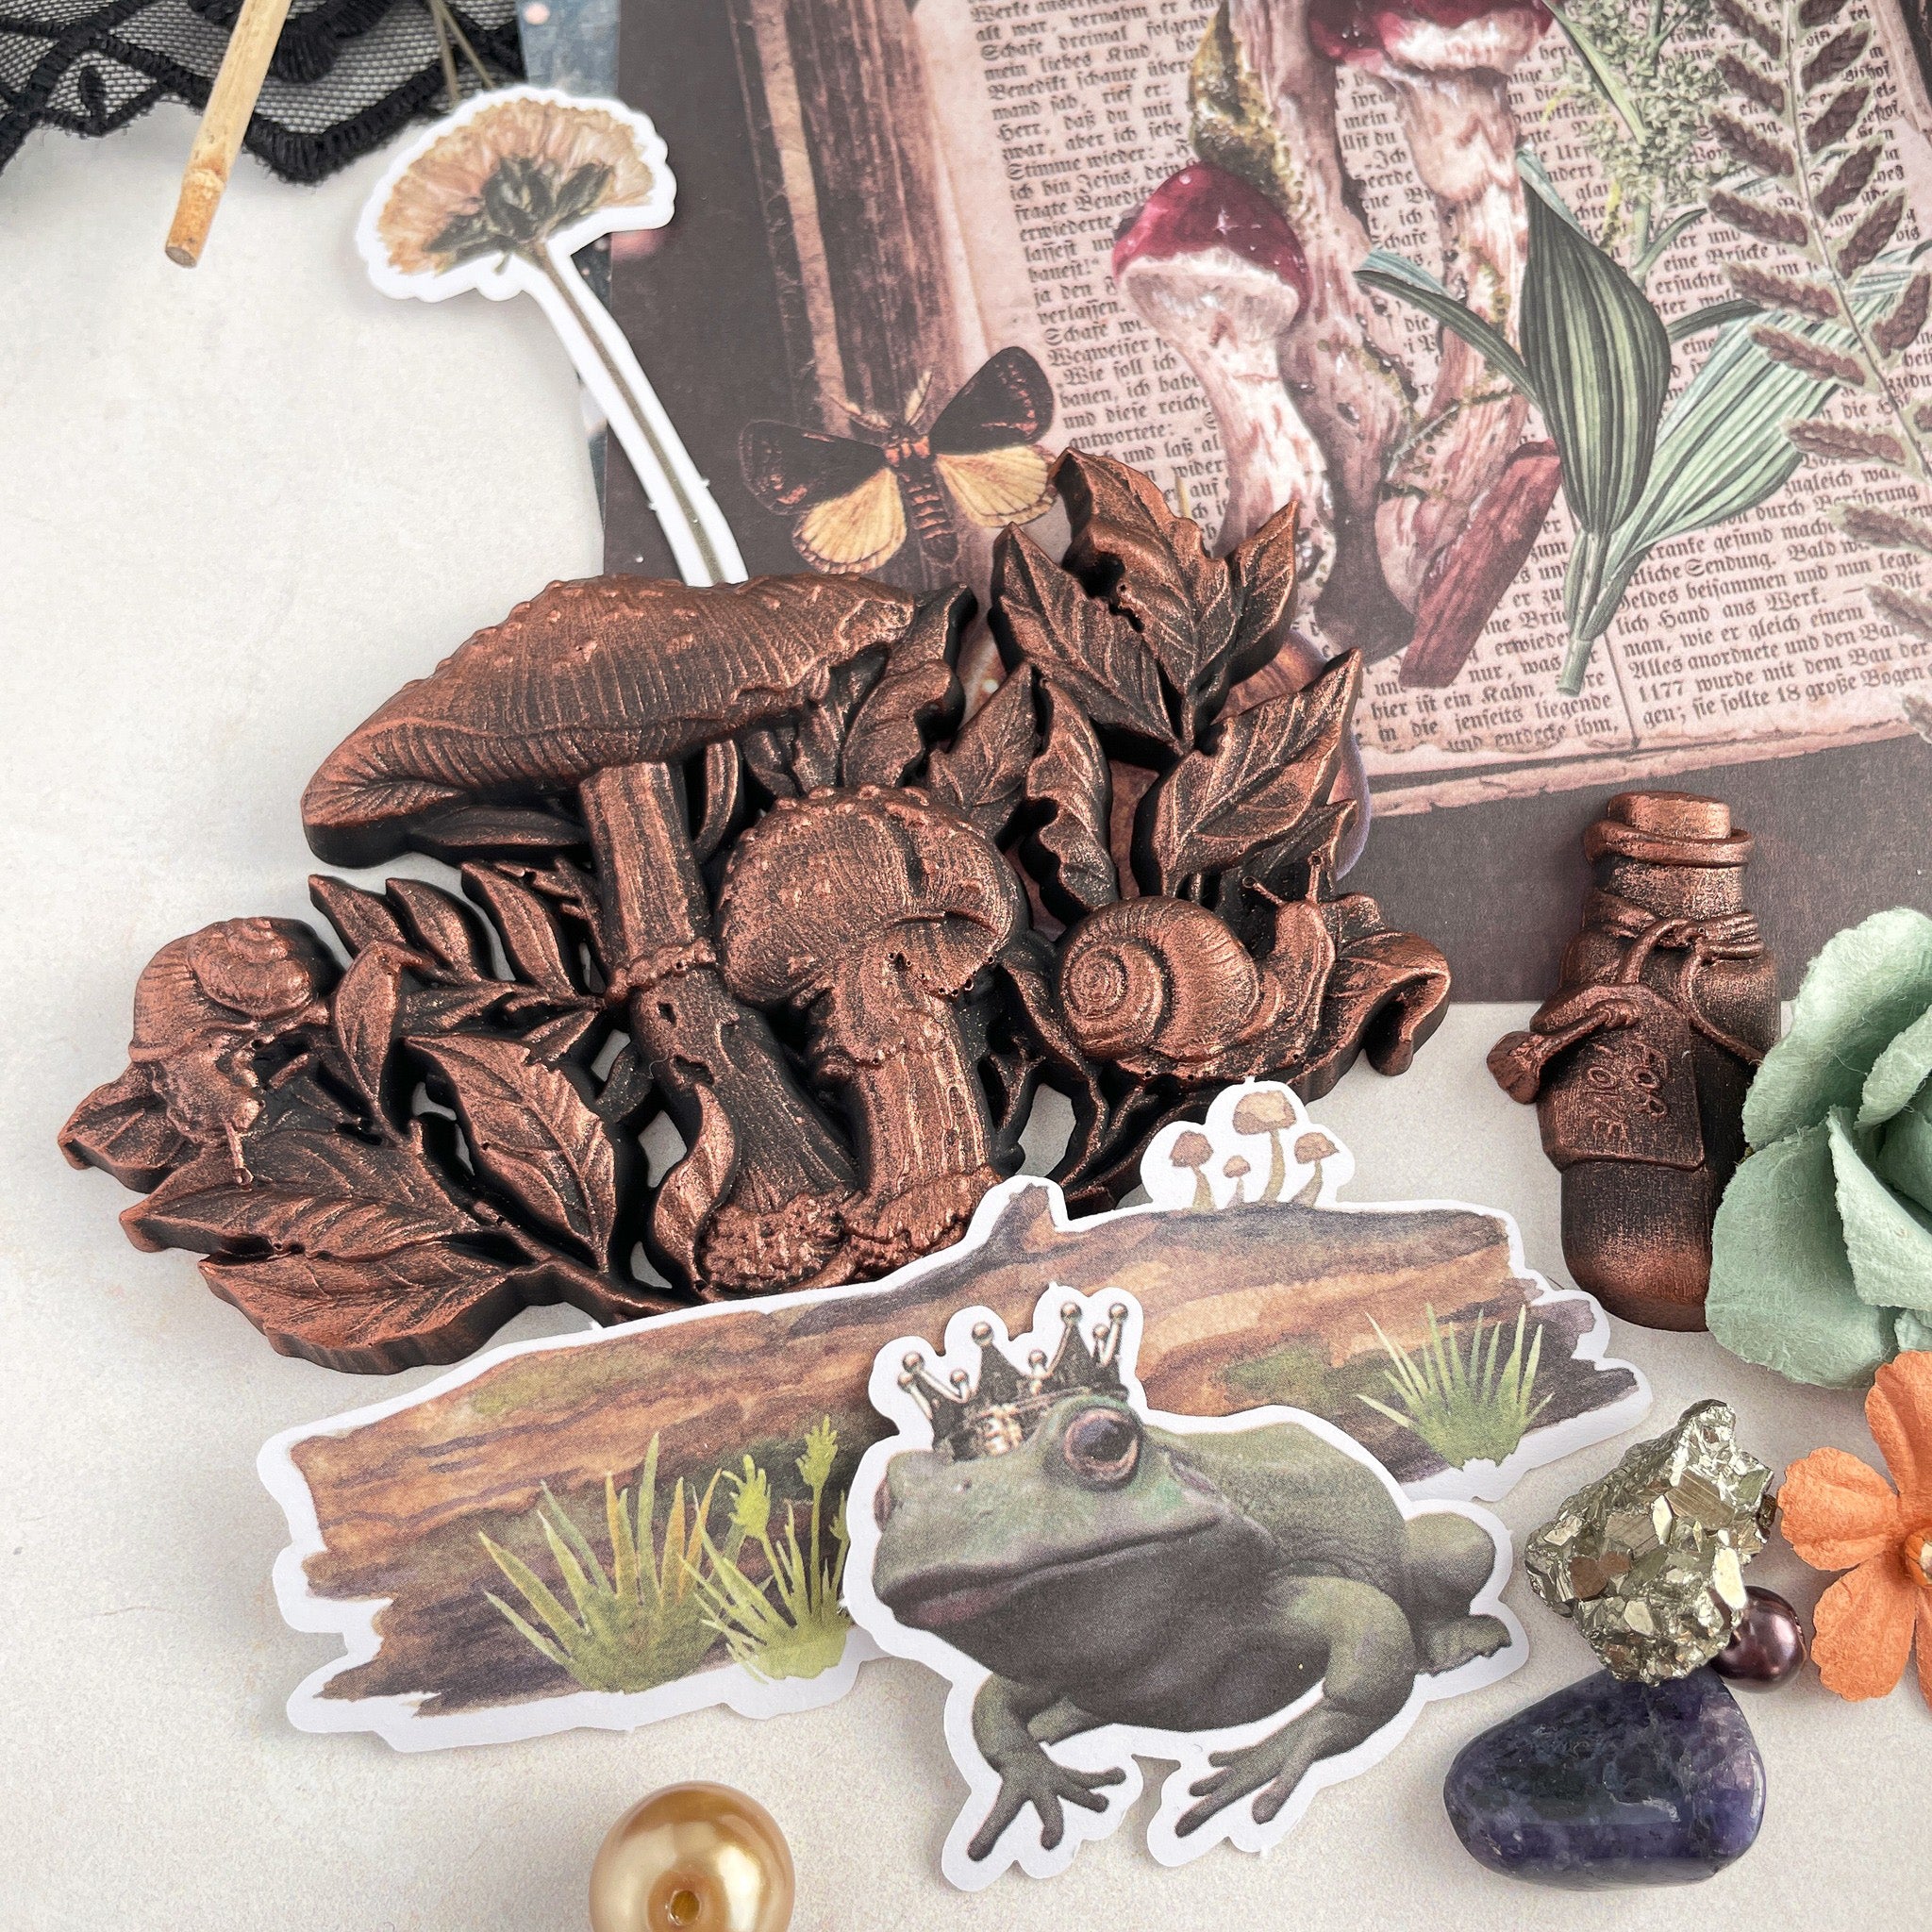 A bronze colored silicone mold casting of a cluster of mushrooms from Prima Marketing's Nature Academia silicone mold is against a white background with paper cut-outs of a frog in a crown and a log with mushrooms growing on it.